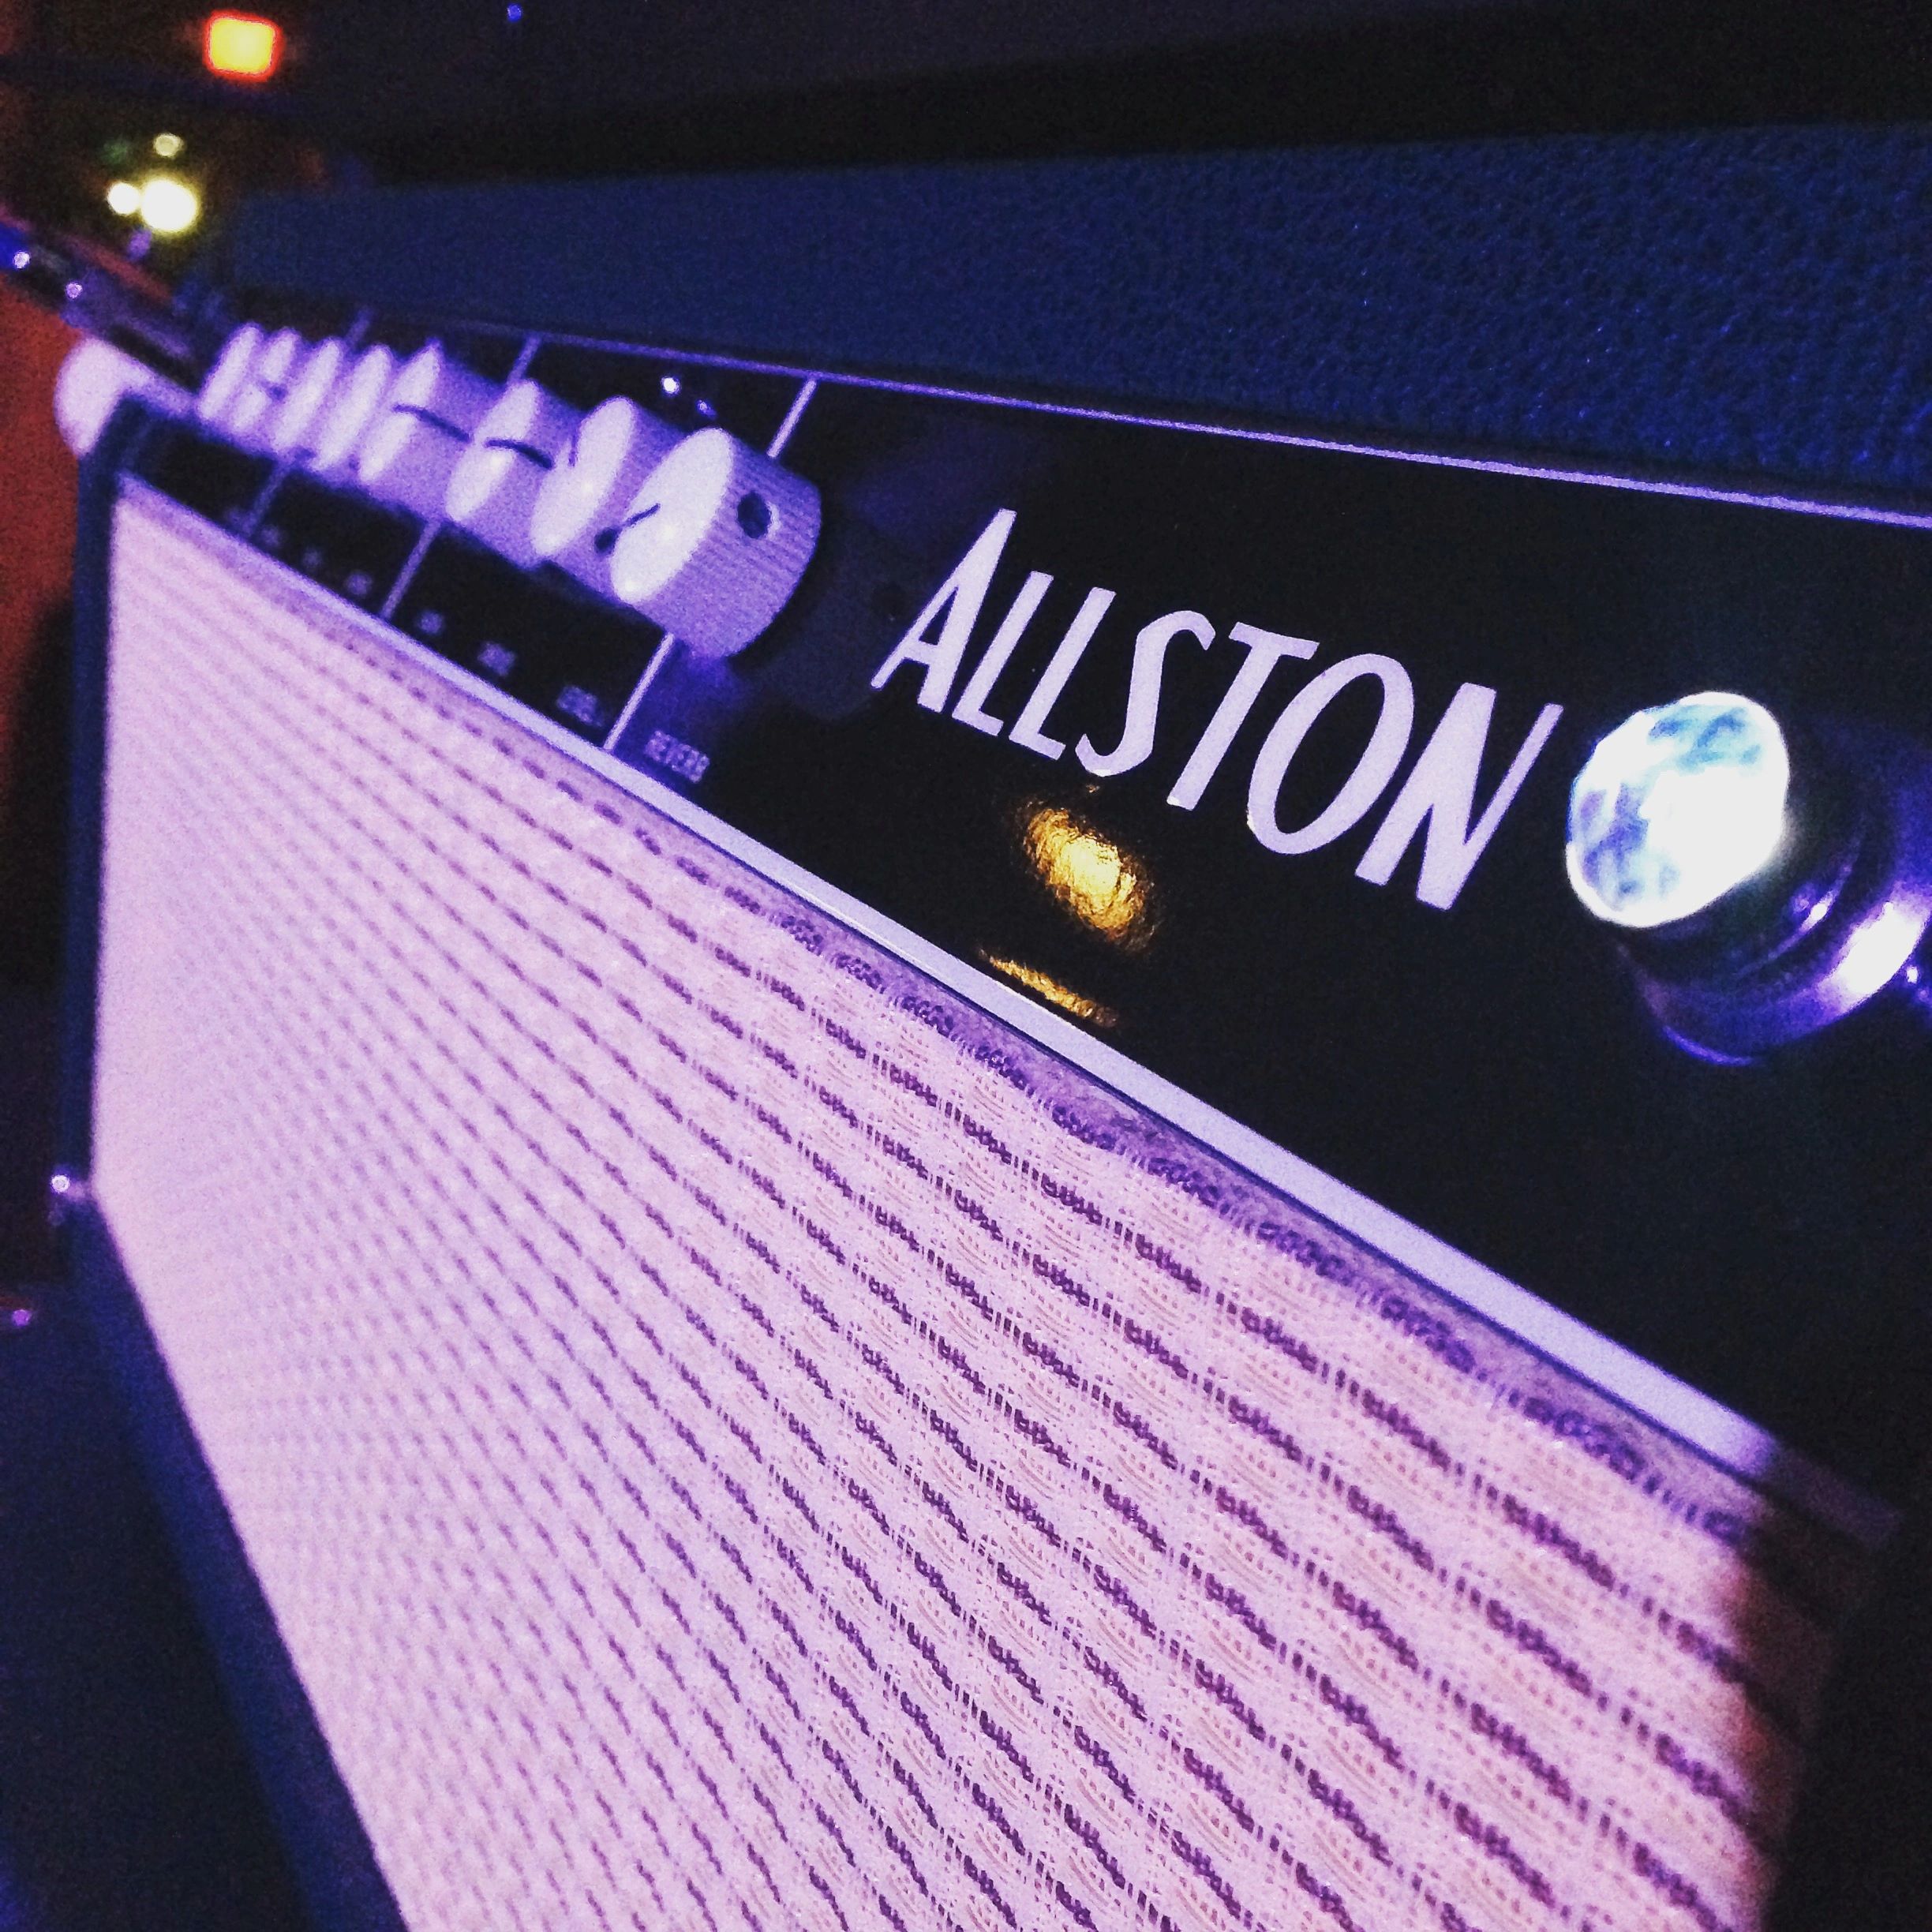 Perspective view of Sam's Allston AOC mark 1 head under blue stage lighting.